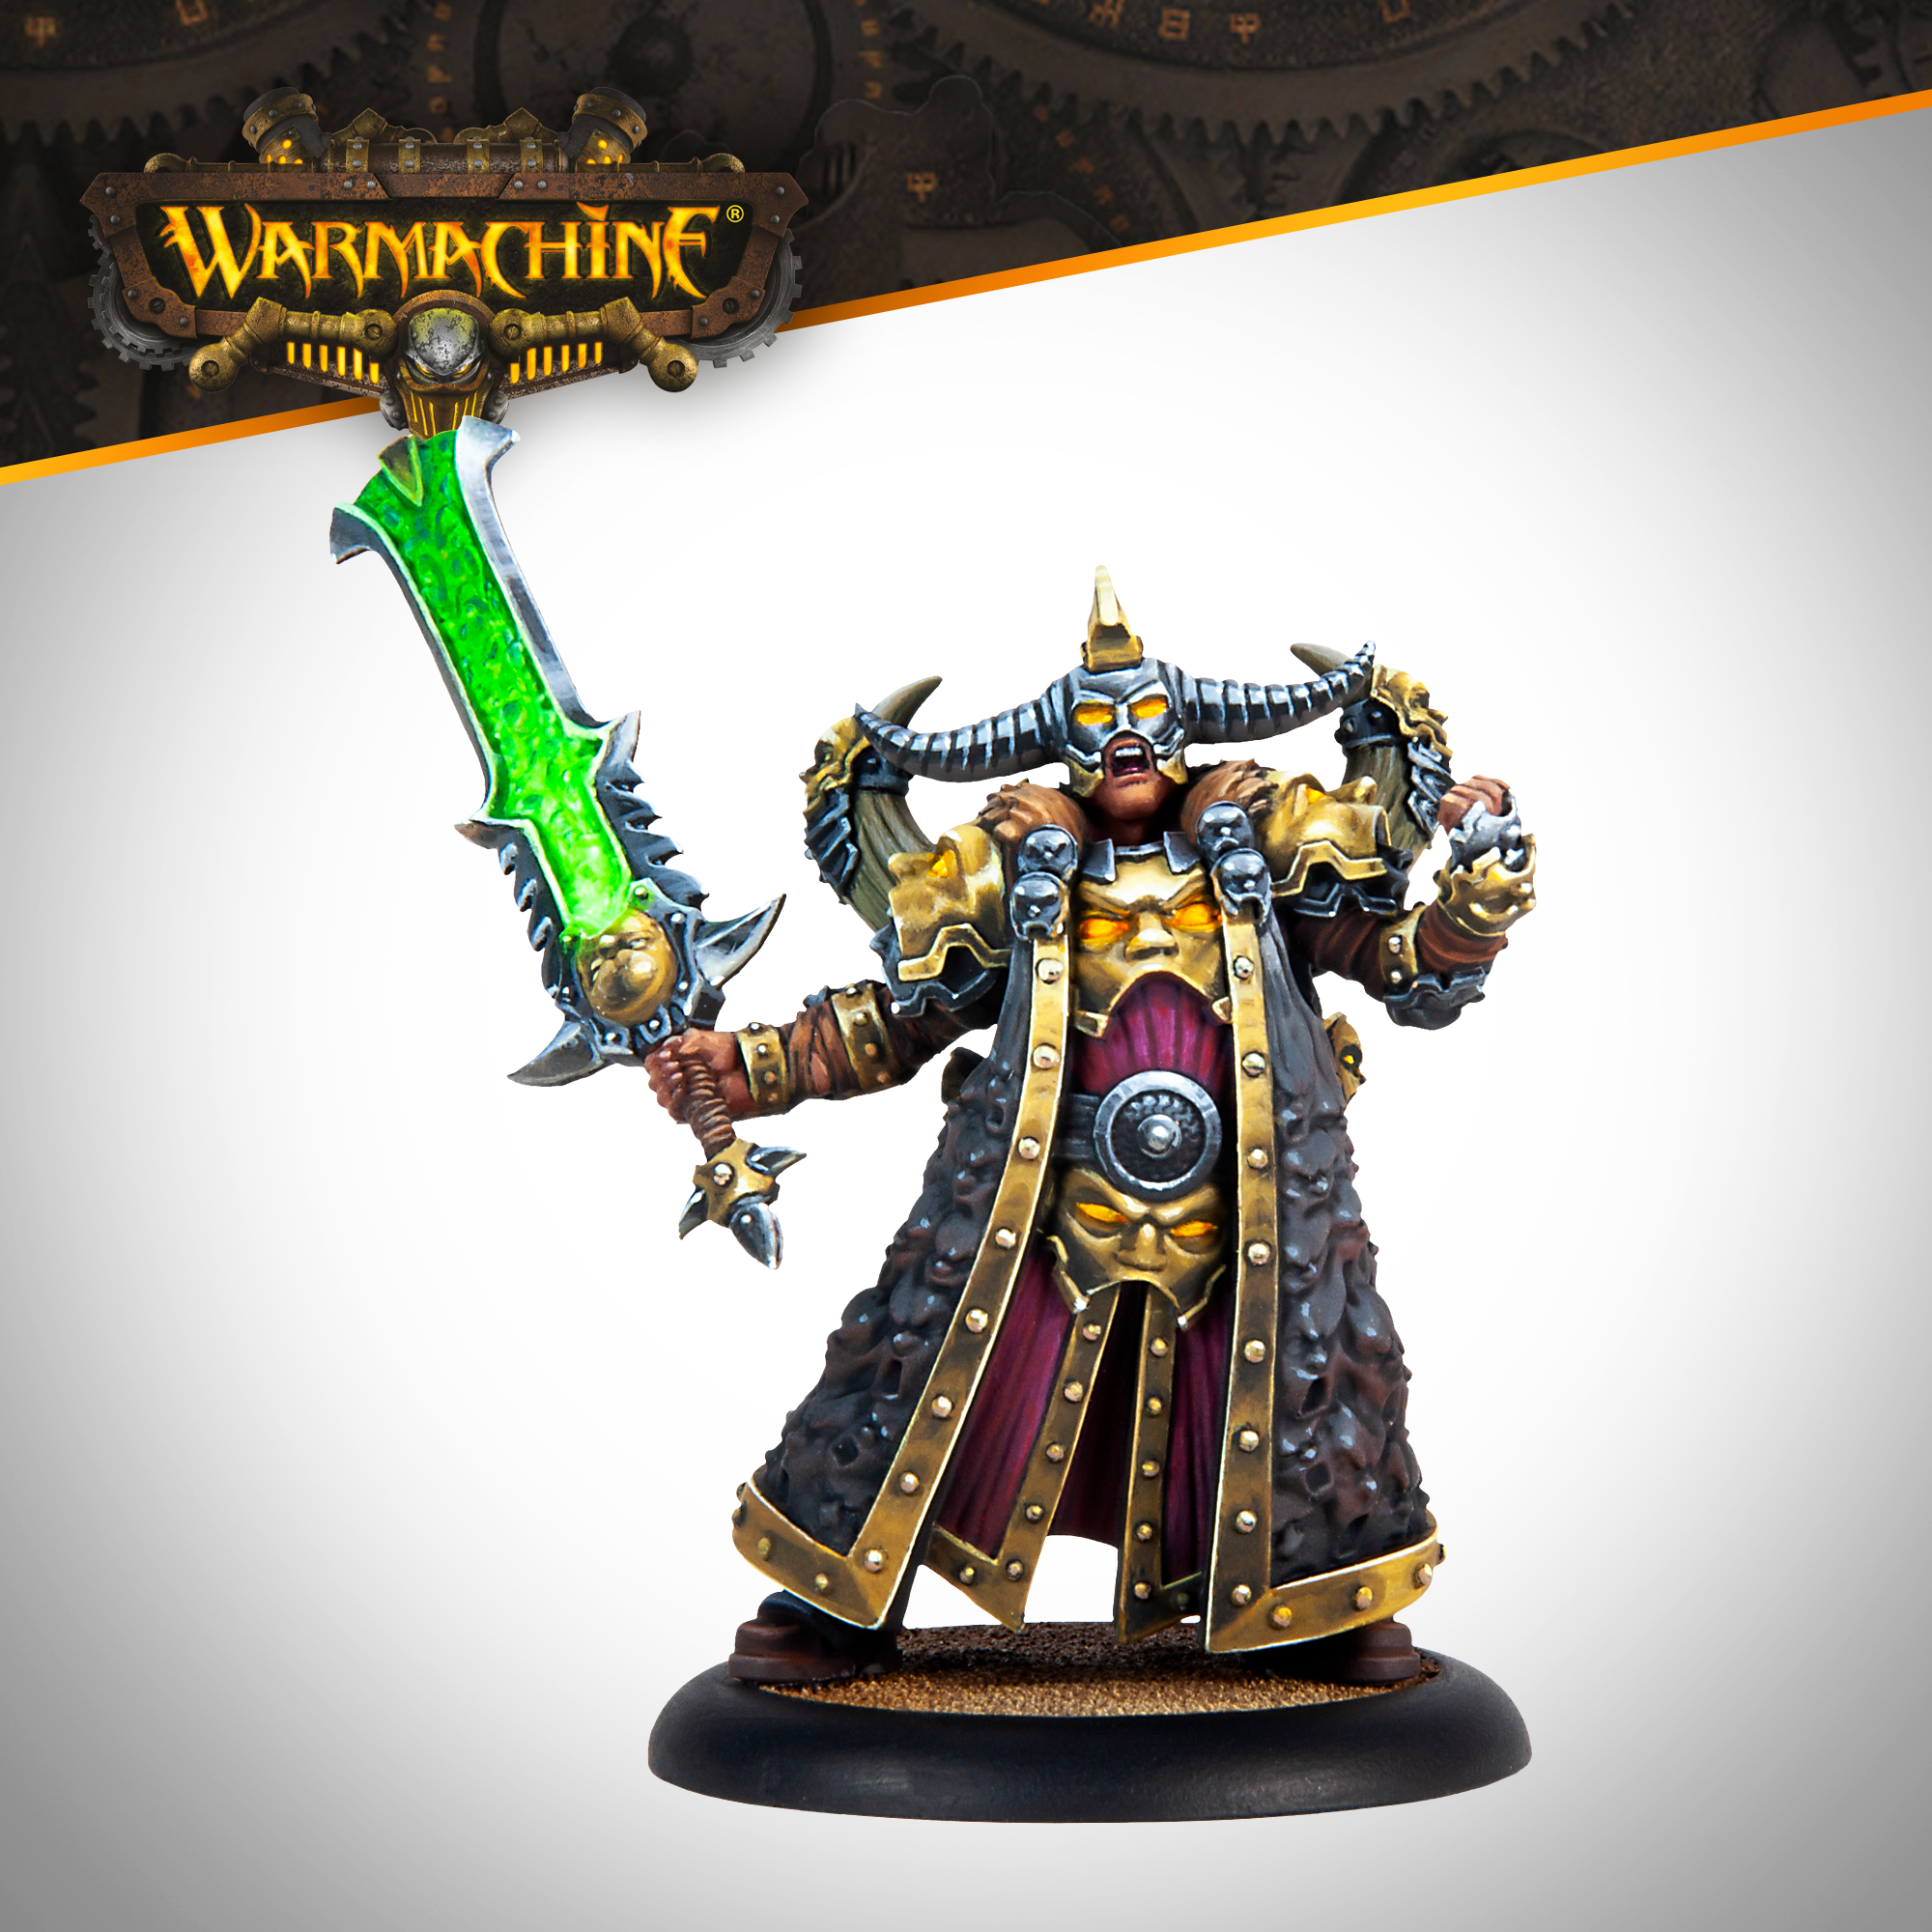 Warmachine: Horruskh, The Thousand Faces